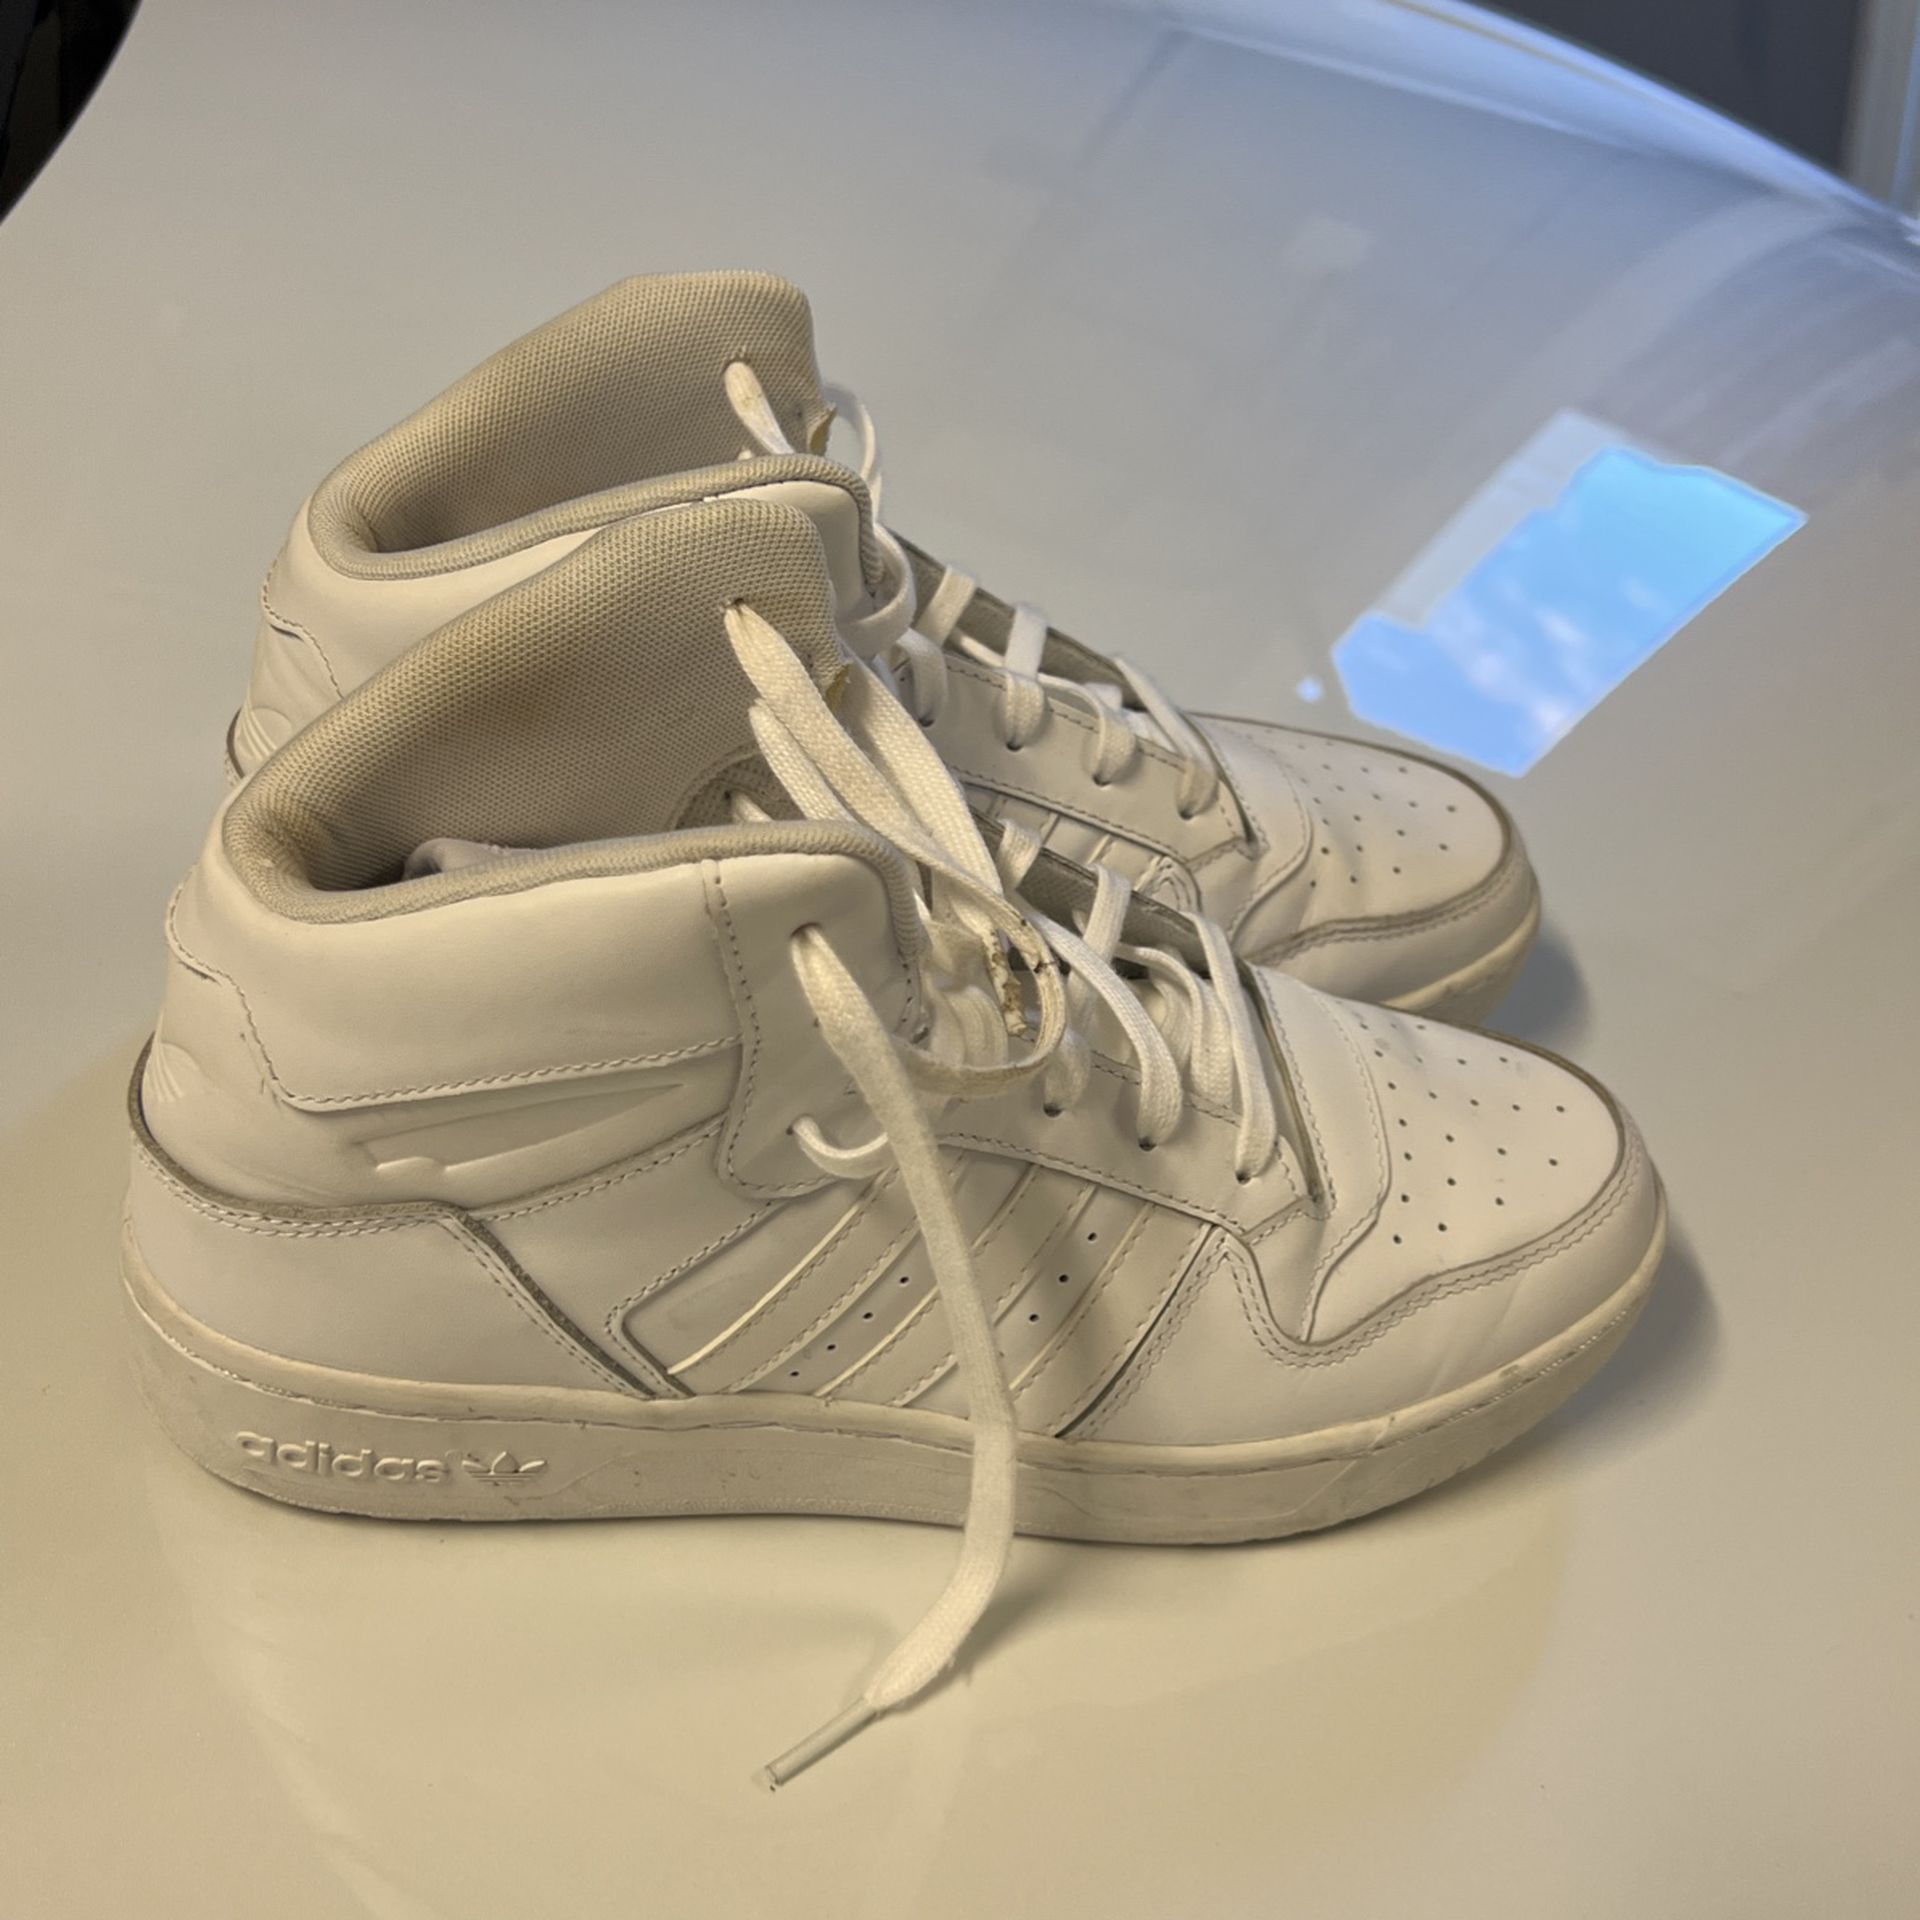 Adidas White High Tops Shoes